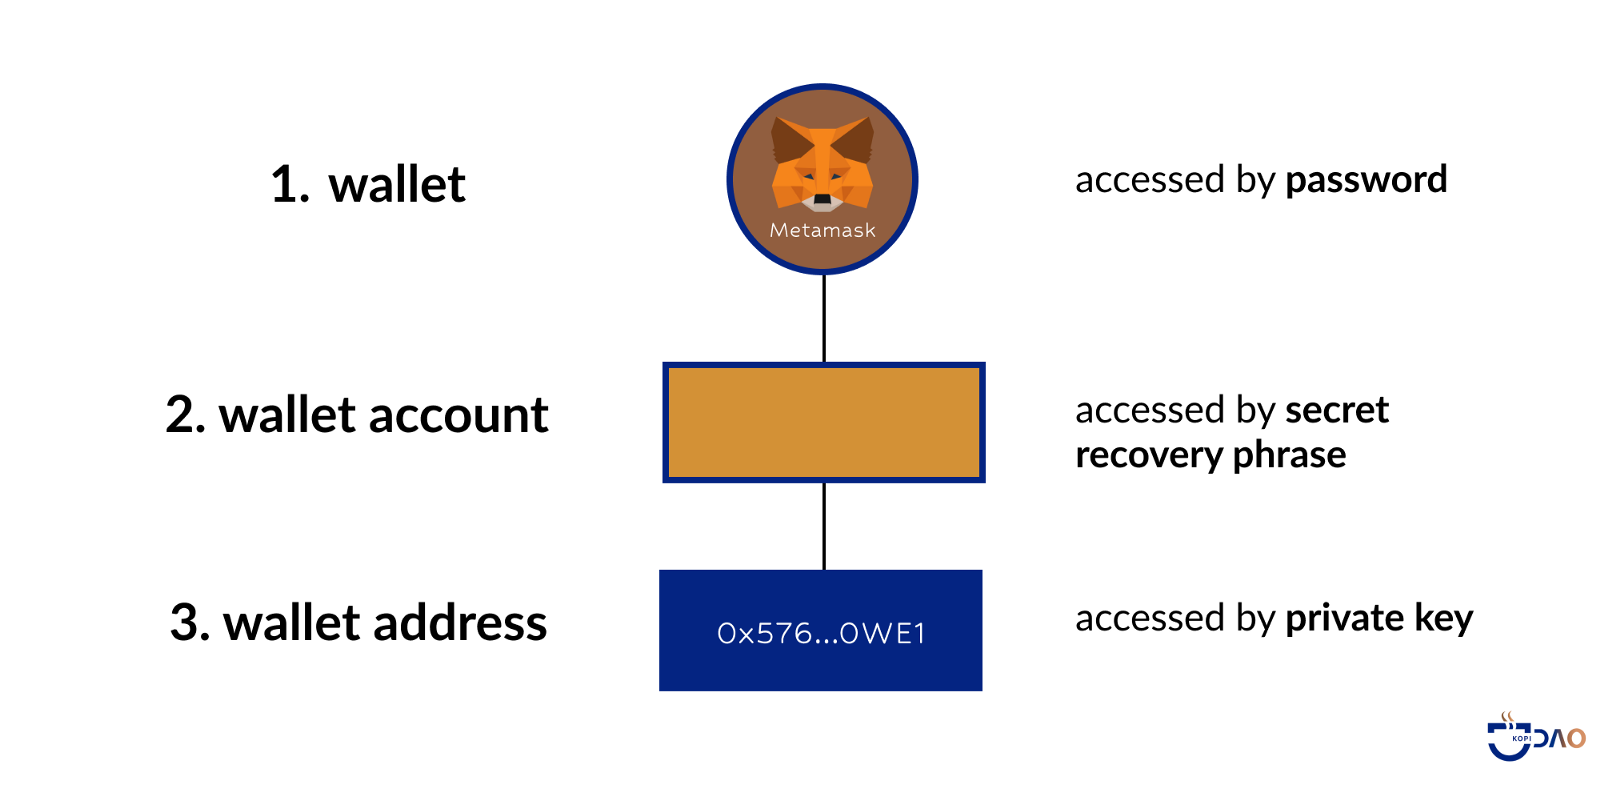 The 3 layers of a Web3 wallet: The Wallet layer, the Wallet Account layer, and the Wallet Address layer are  all accessed by different secrets (i.e. credentials).